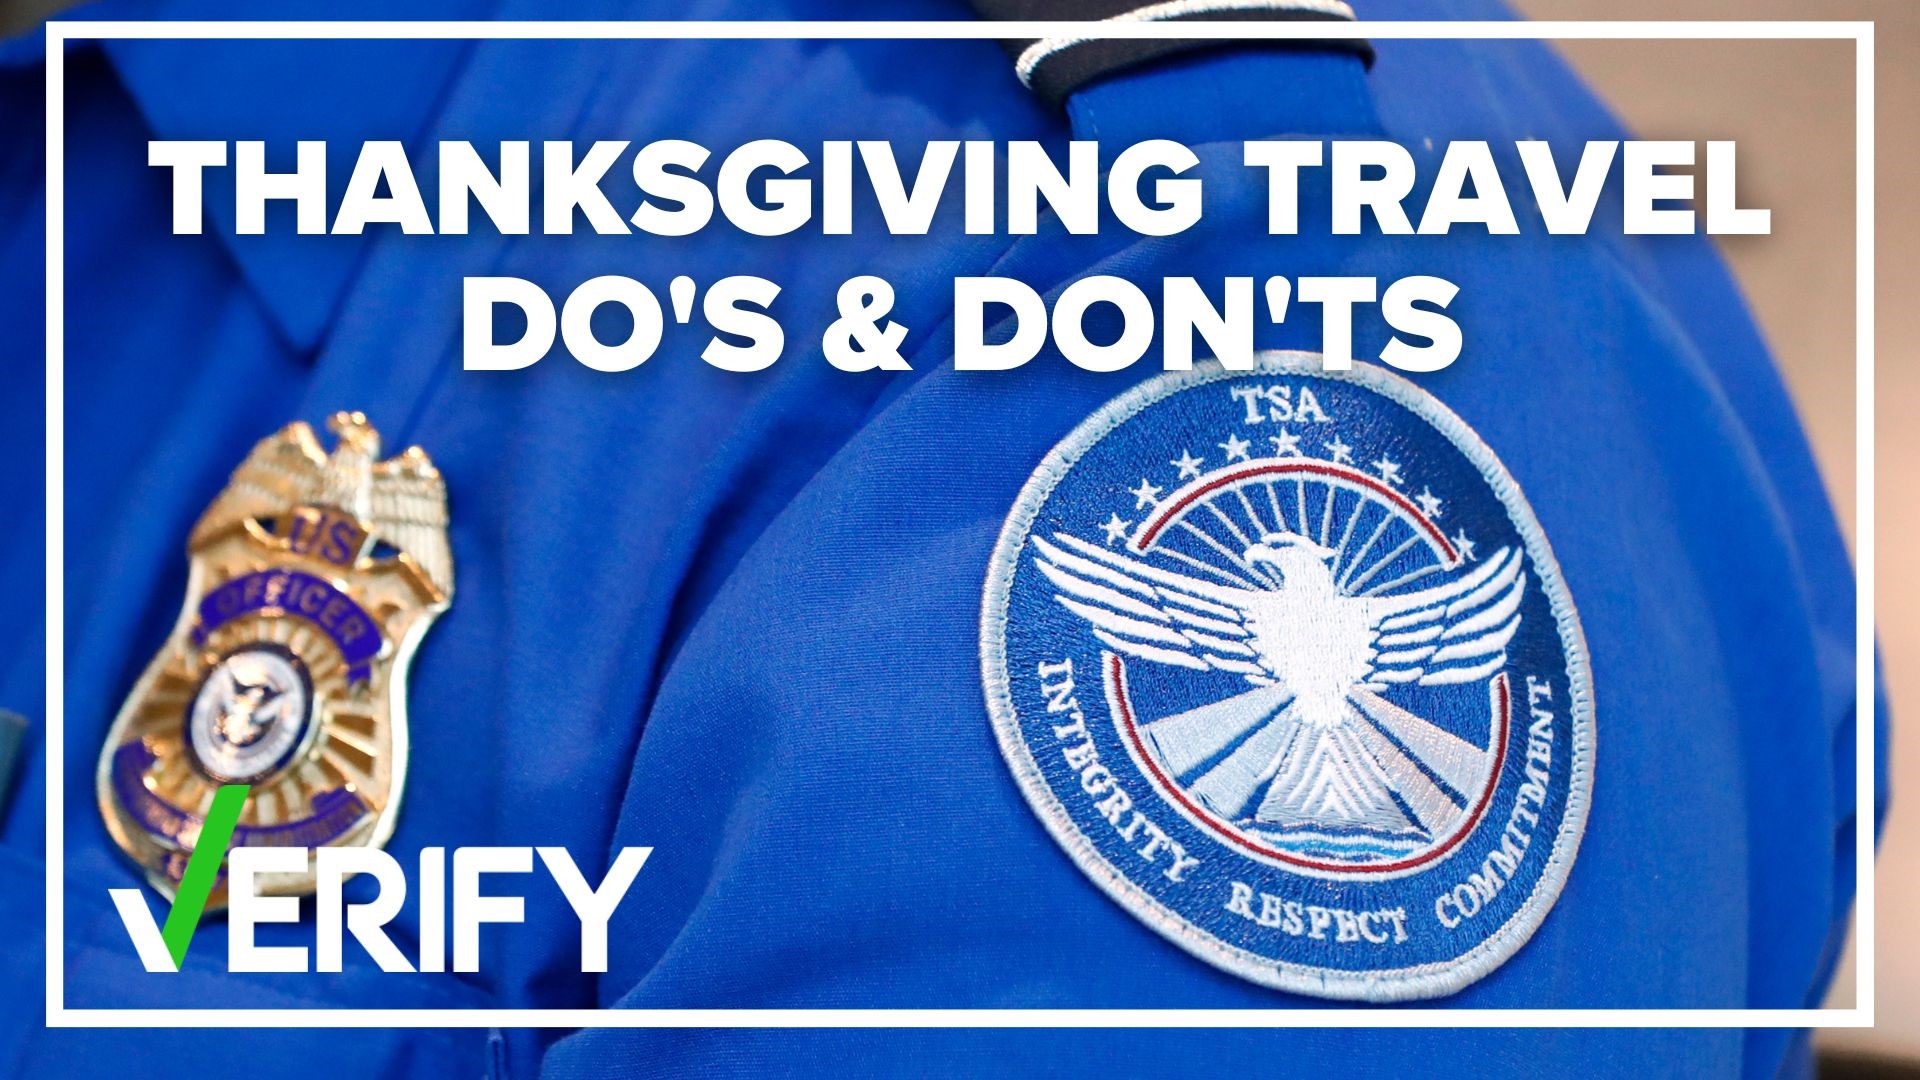 The week of Thanksgiving is here and many people have already left home for travel. TSA lines will be long, but to help you out, these foods are cleared to fly.